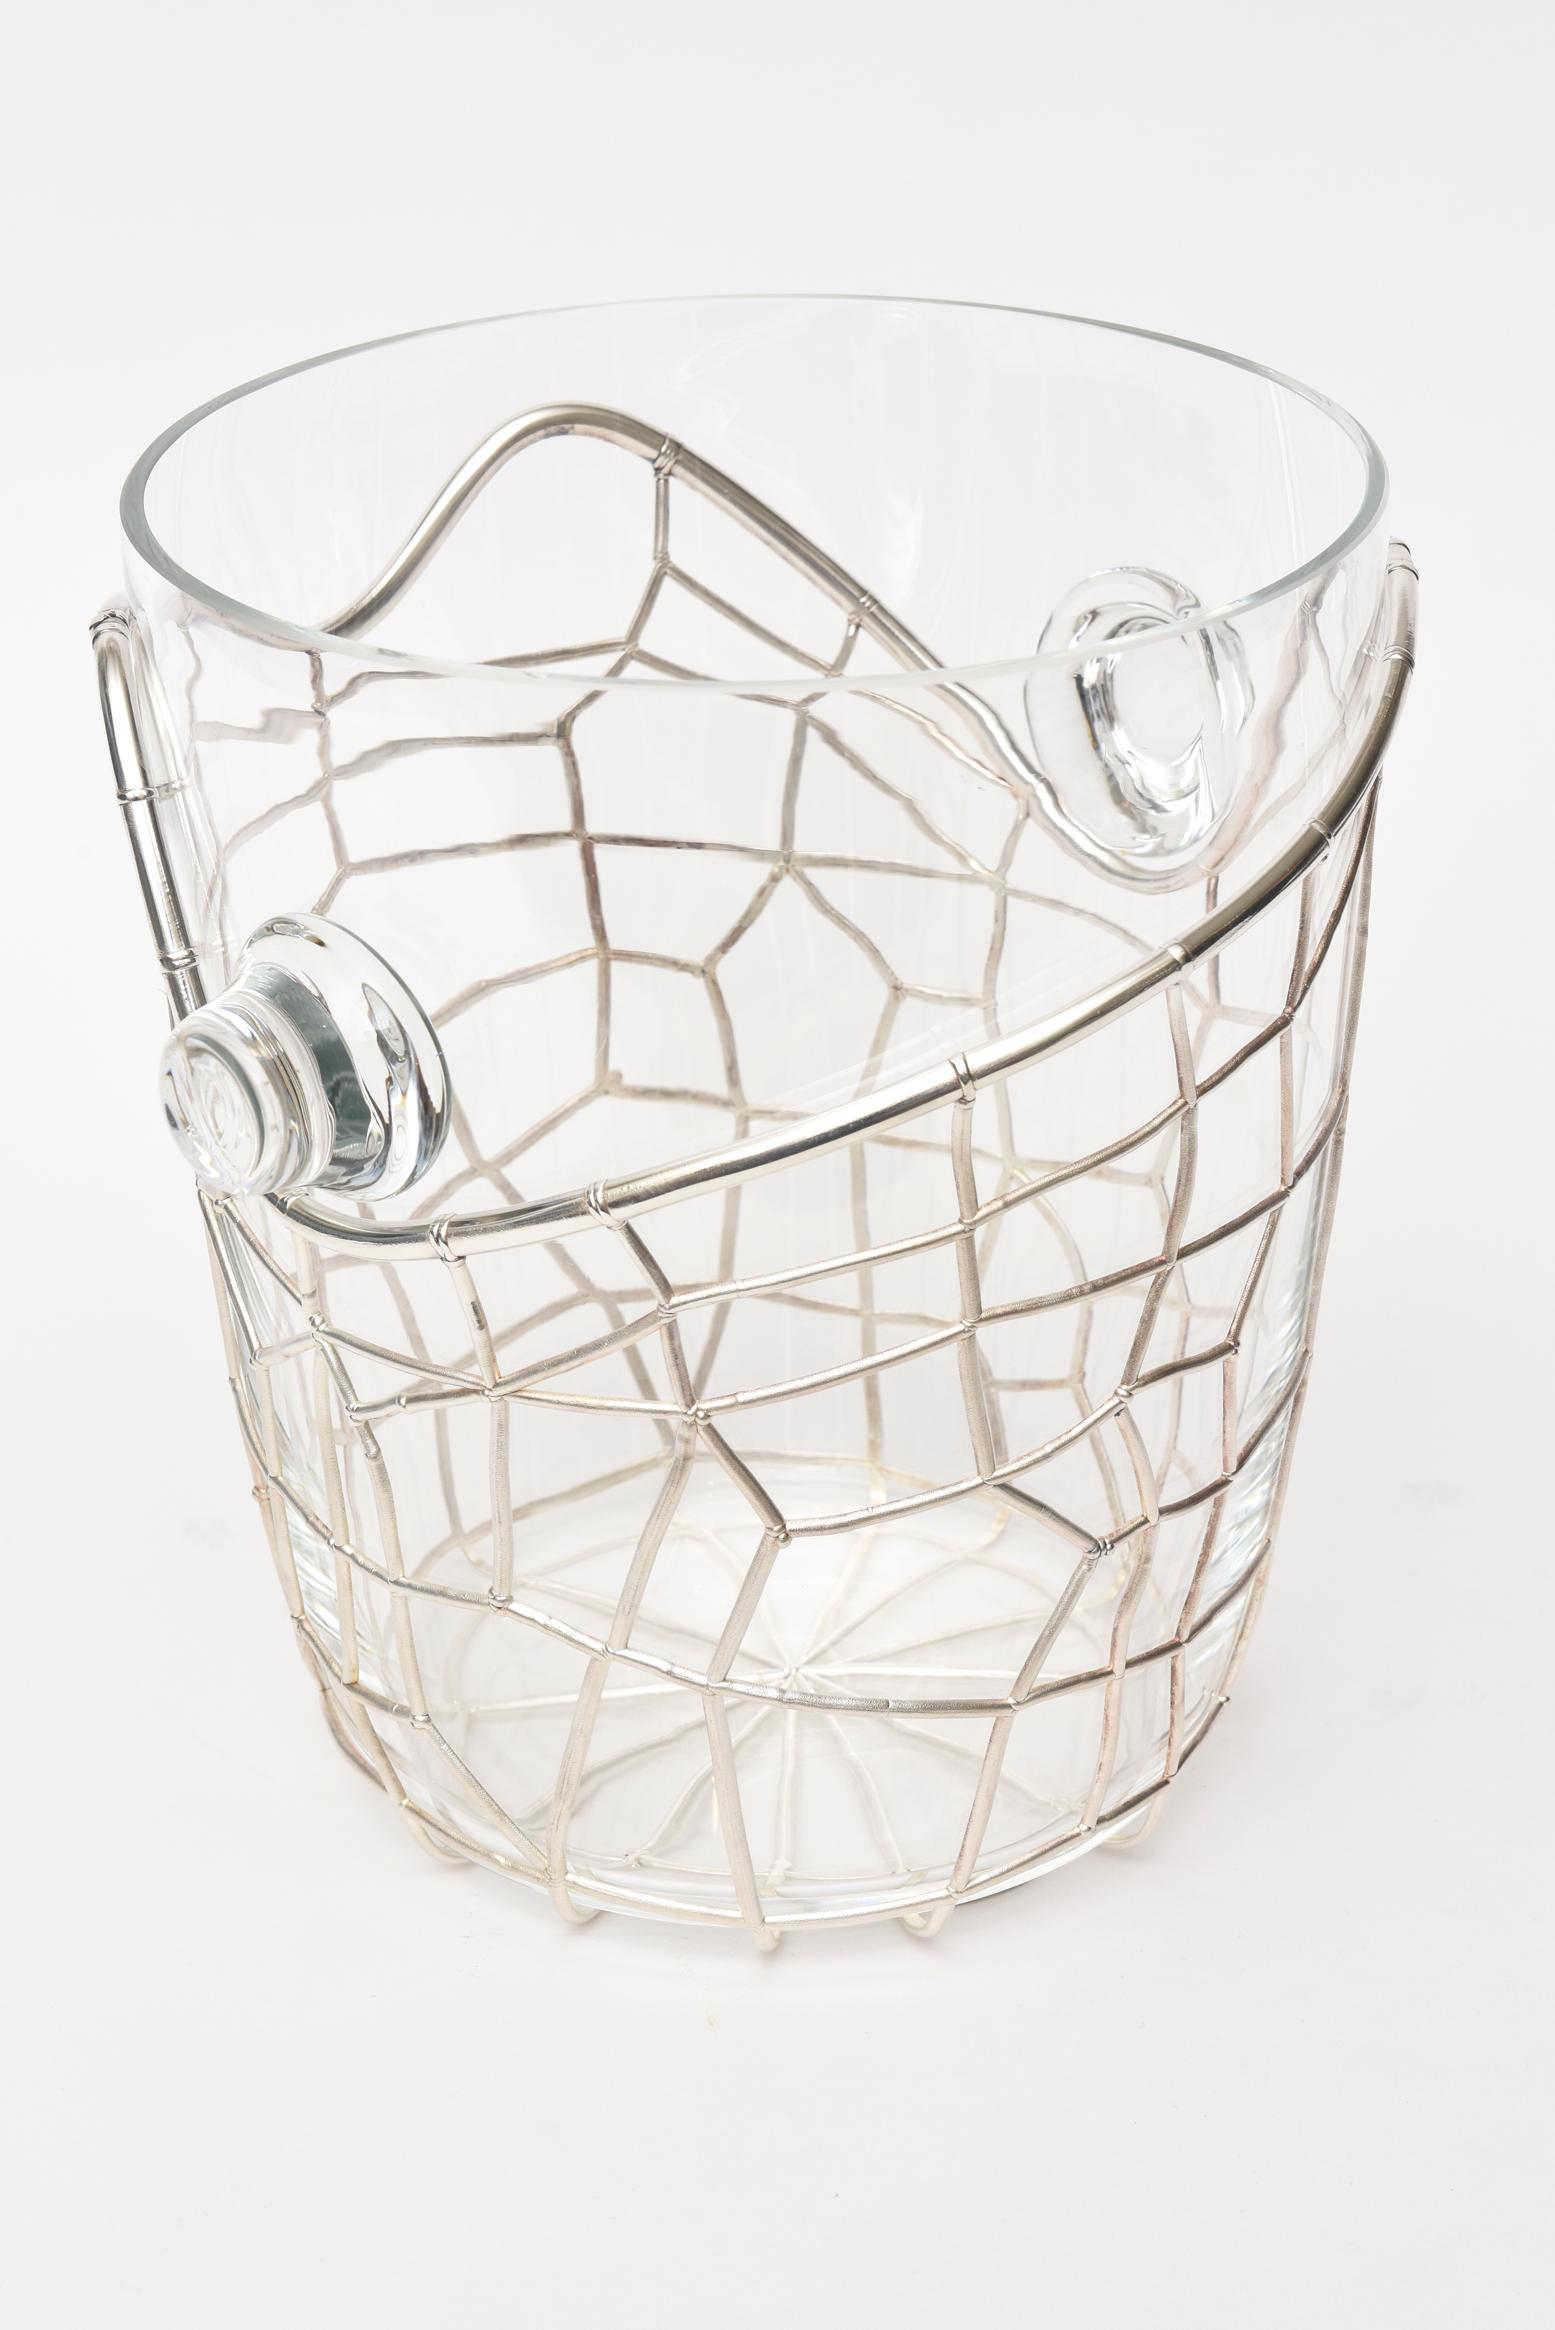 This absolutely stunning and sculptural signed Italian Pampaloni sterling silver and glass ice and champagne bucket is vintage. It is like a web of sterling silver abstract form on the outside with a glass insert with glass handles. This was never